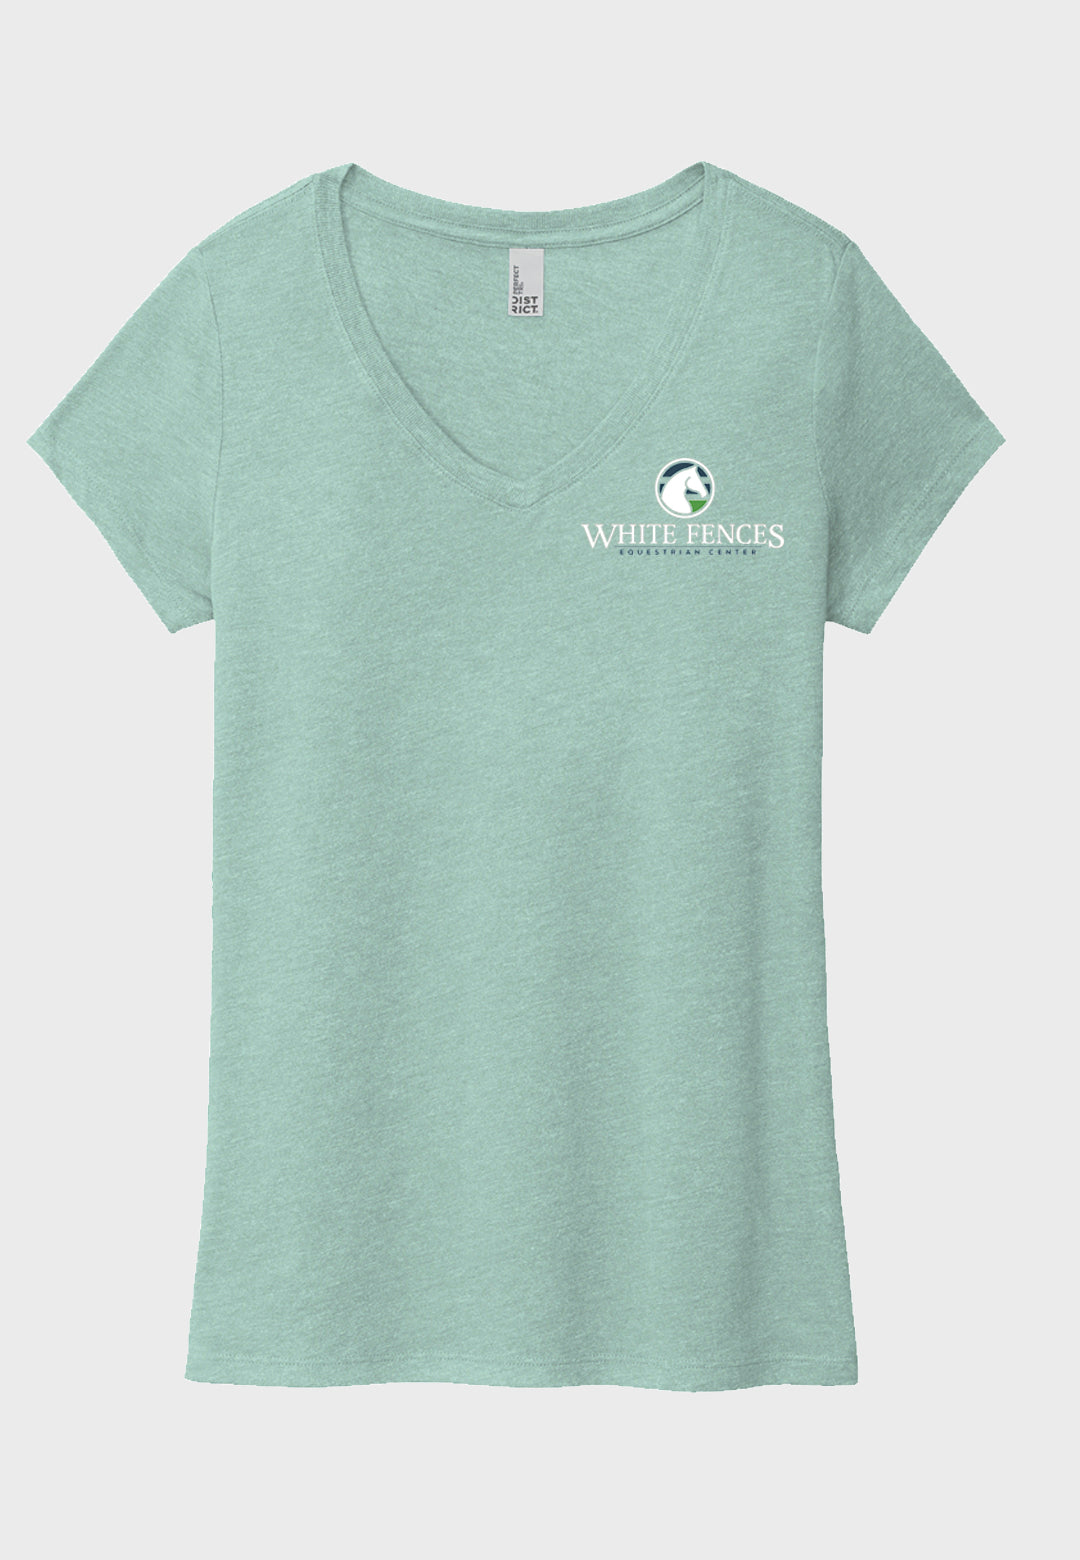 White Fences Equestrian Center District ® ladies Perfect Tri ® V-Neck Tee - Multiple color options